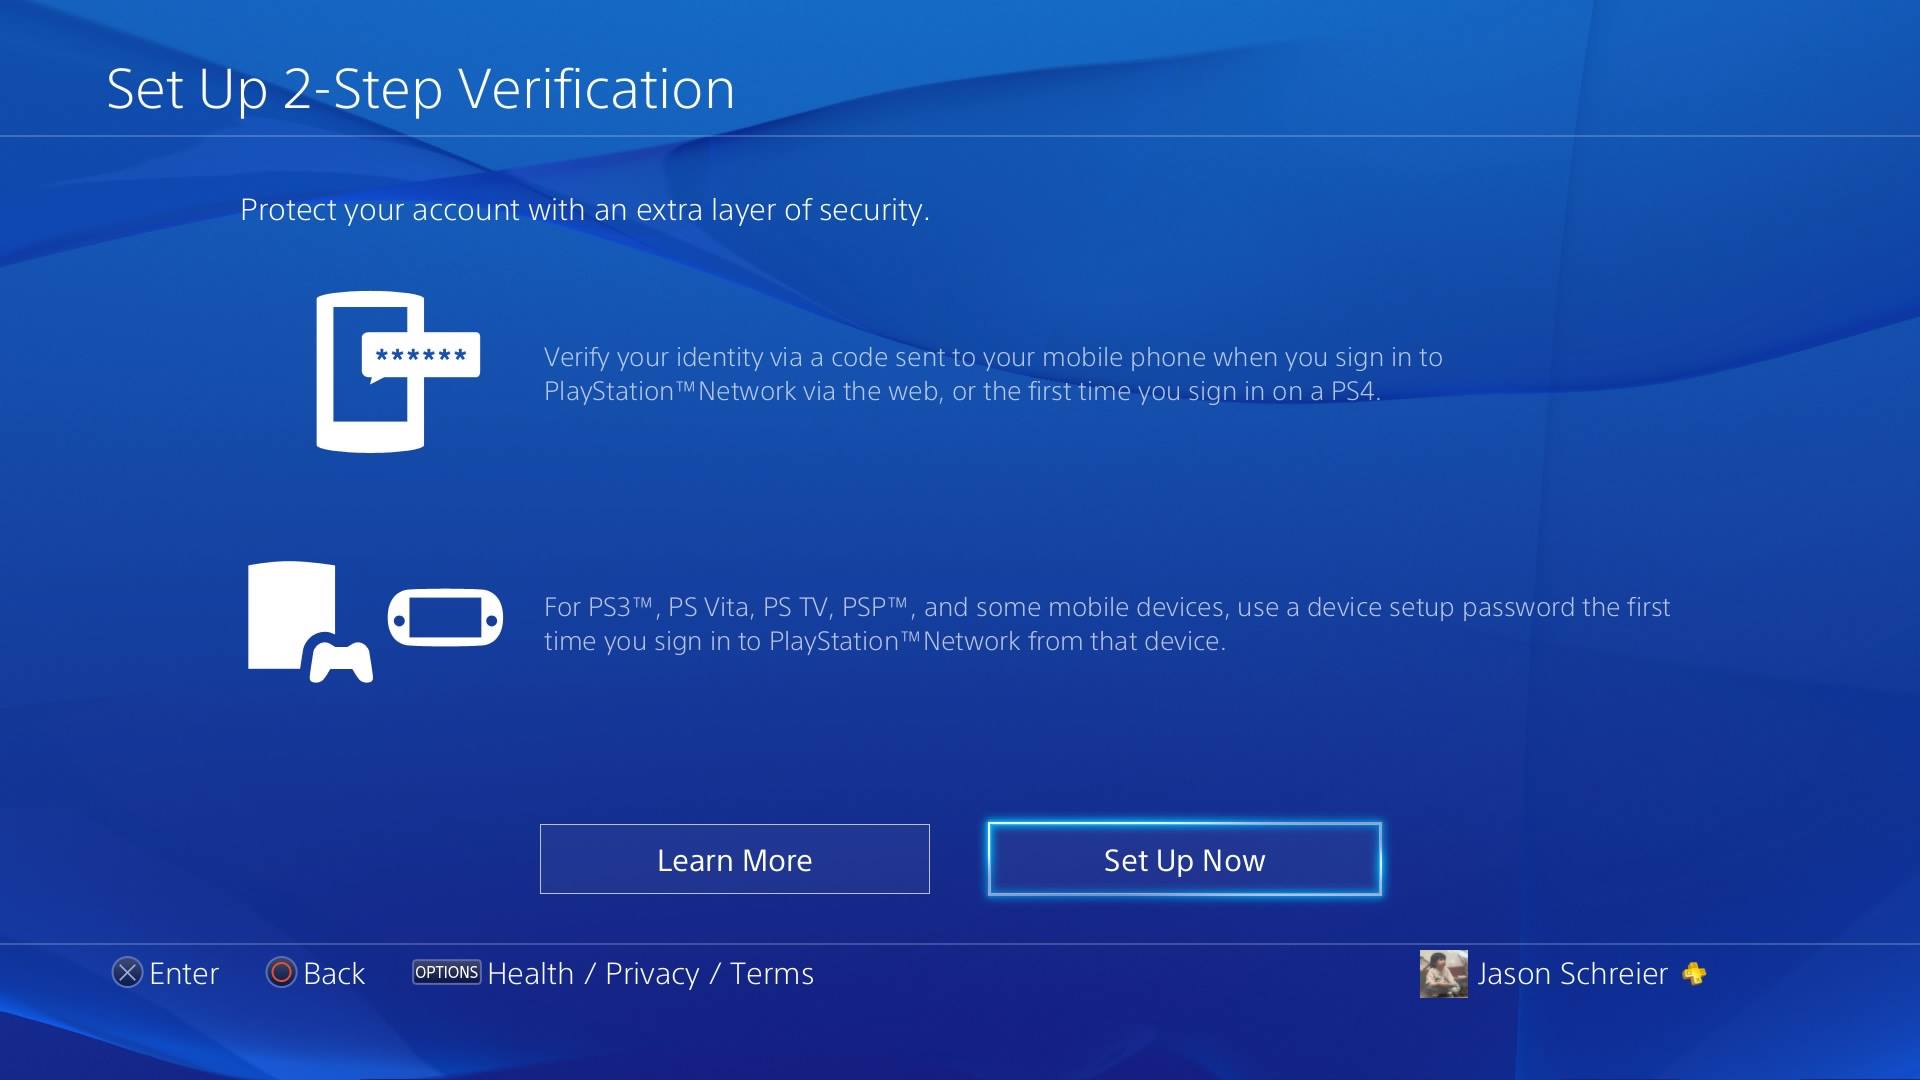 PS3 Device Setup Password issues : r/playstation